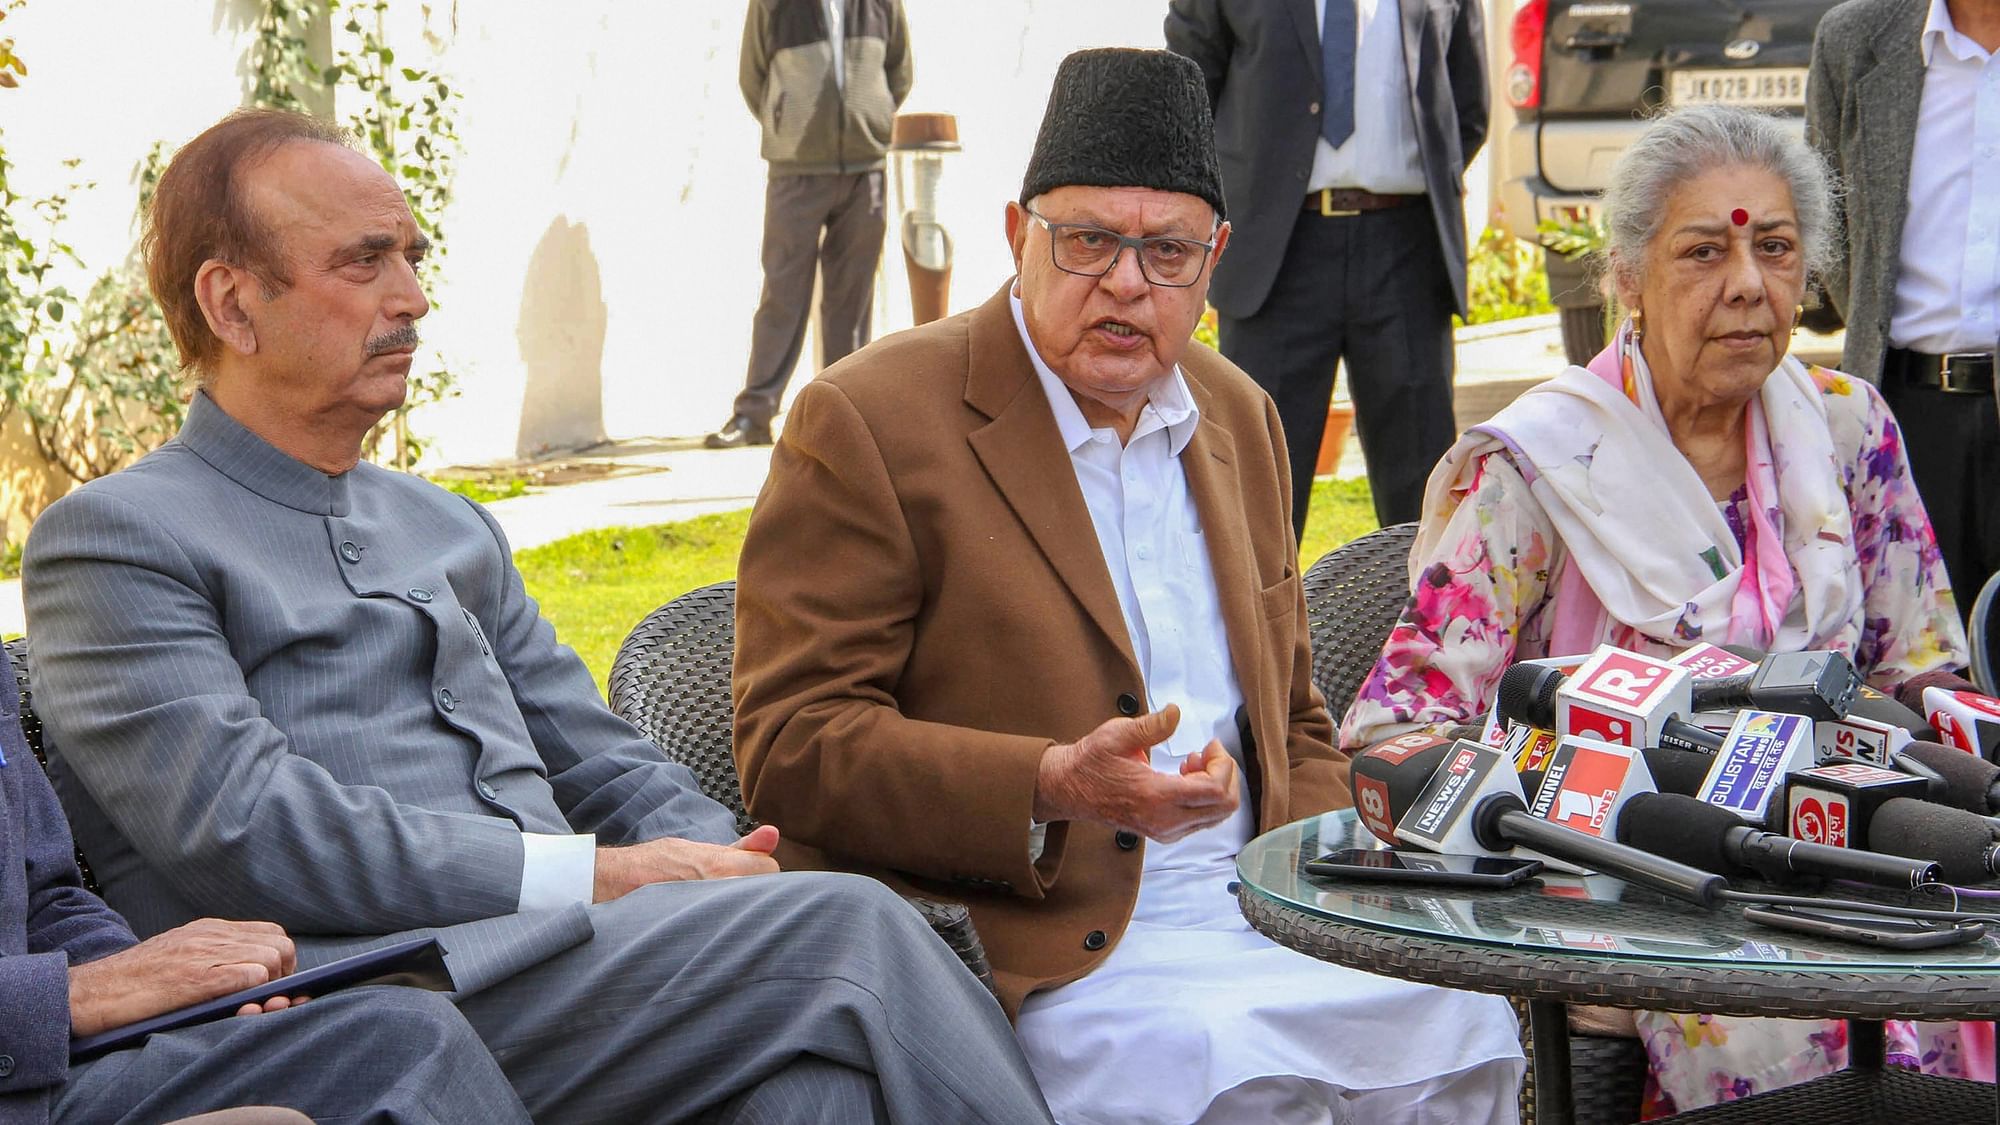 National Conference President Farooq Abdullah along with senior Congress leaders Ghulam Nabi Azad and Ambika Soni in Jammu on Wednesday, 20 March.